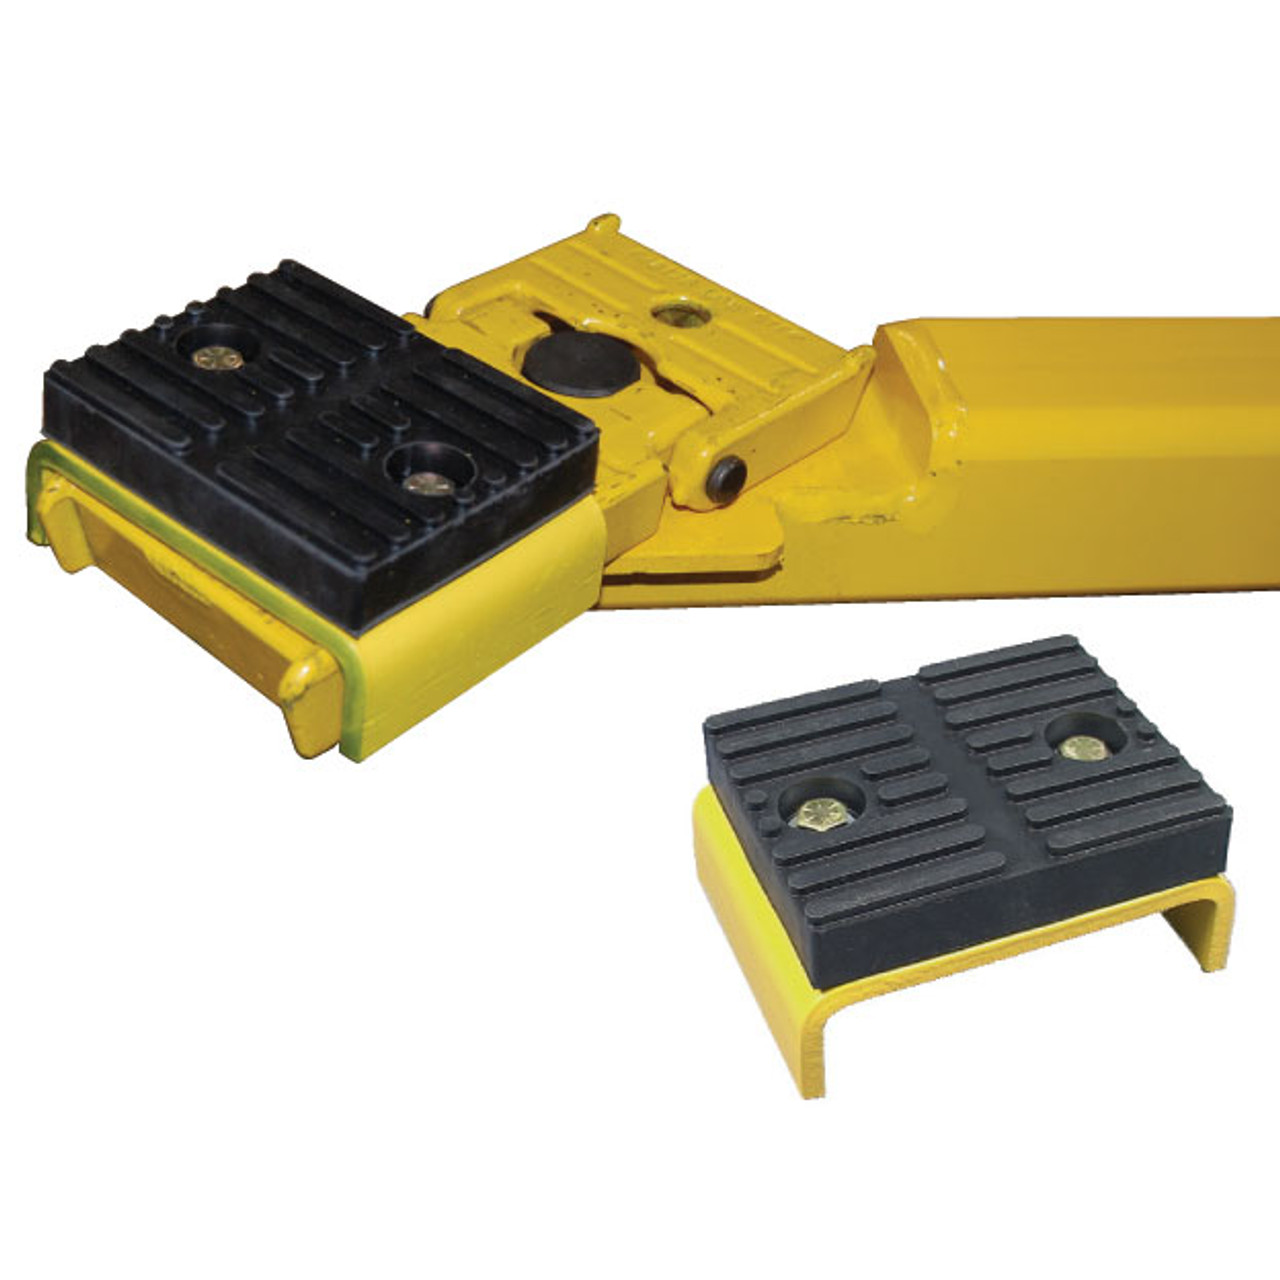 Auto Lift Adapters and Rubber Pads